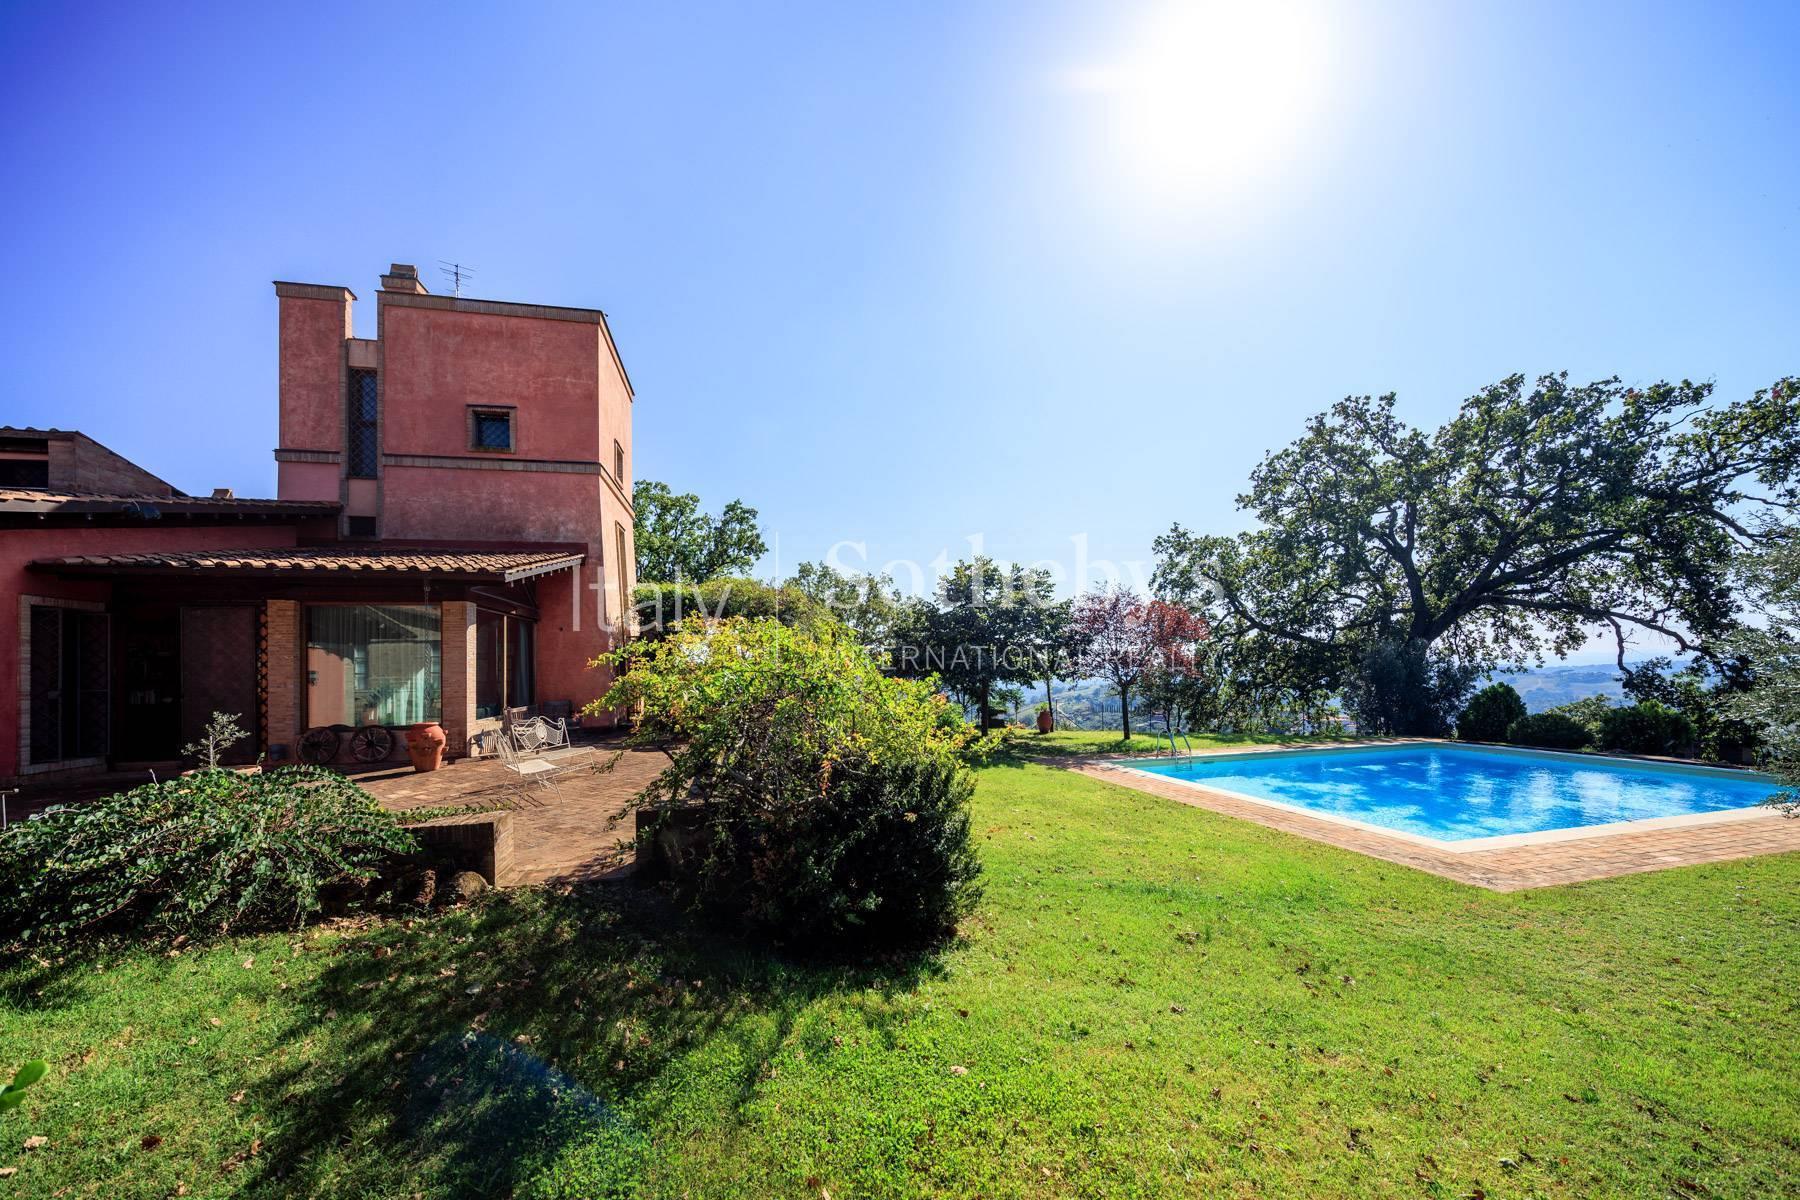 Villa with view and pool in Calvi dell' Umbria - 6